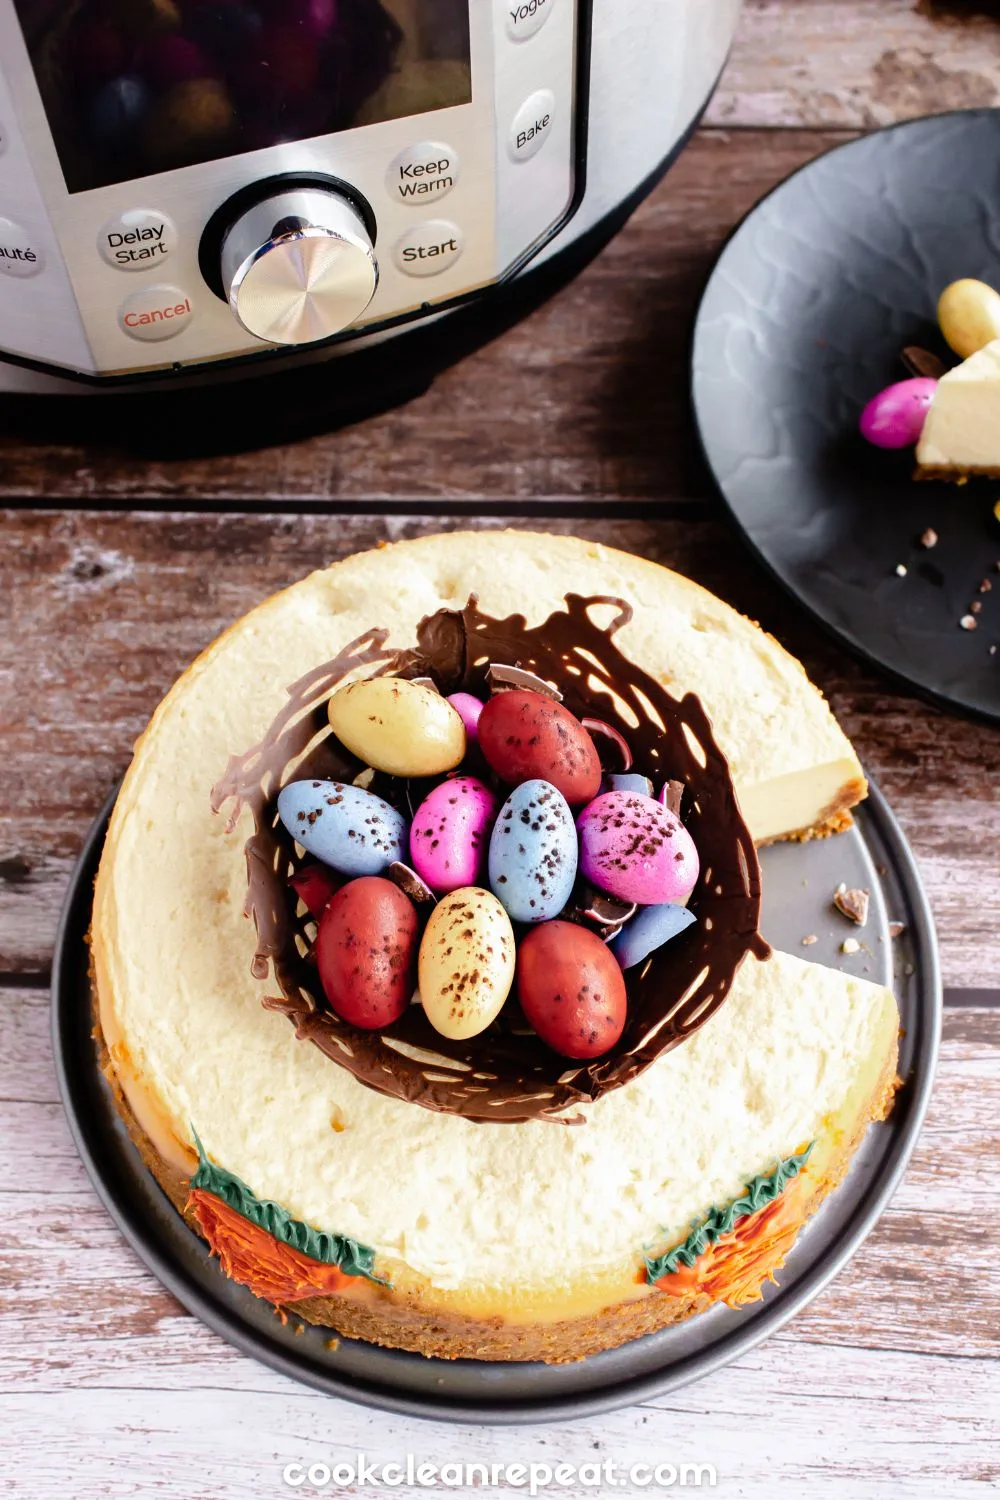 Easter cheesecake recipe completed with a chocolate nest filled with chocolate eggs on top. There are carrots piped onto the side of the cake.